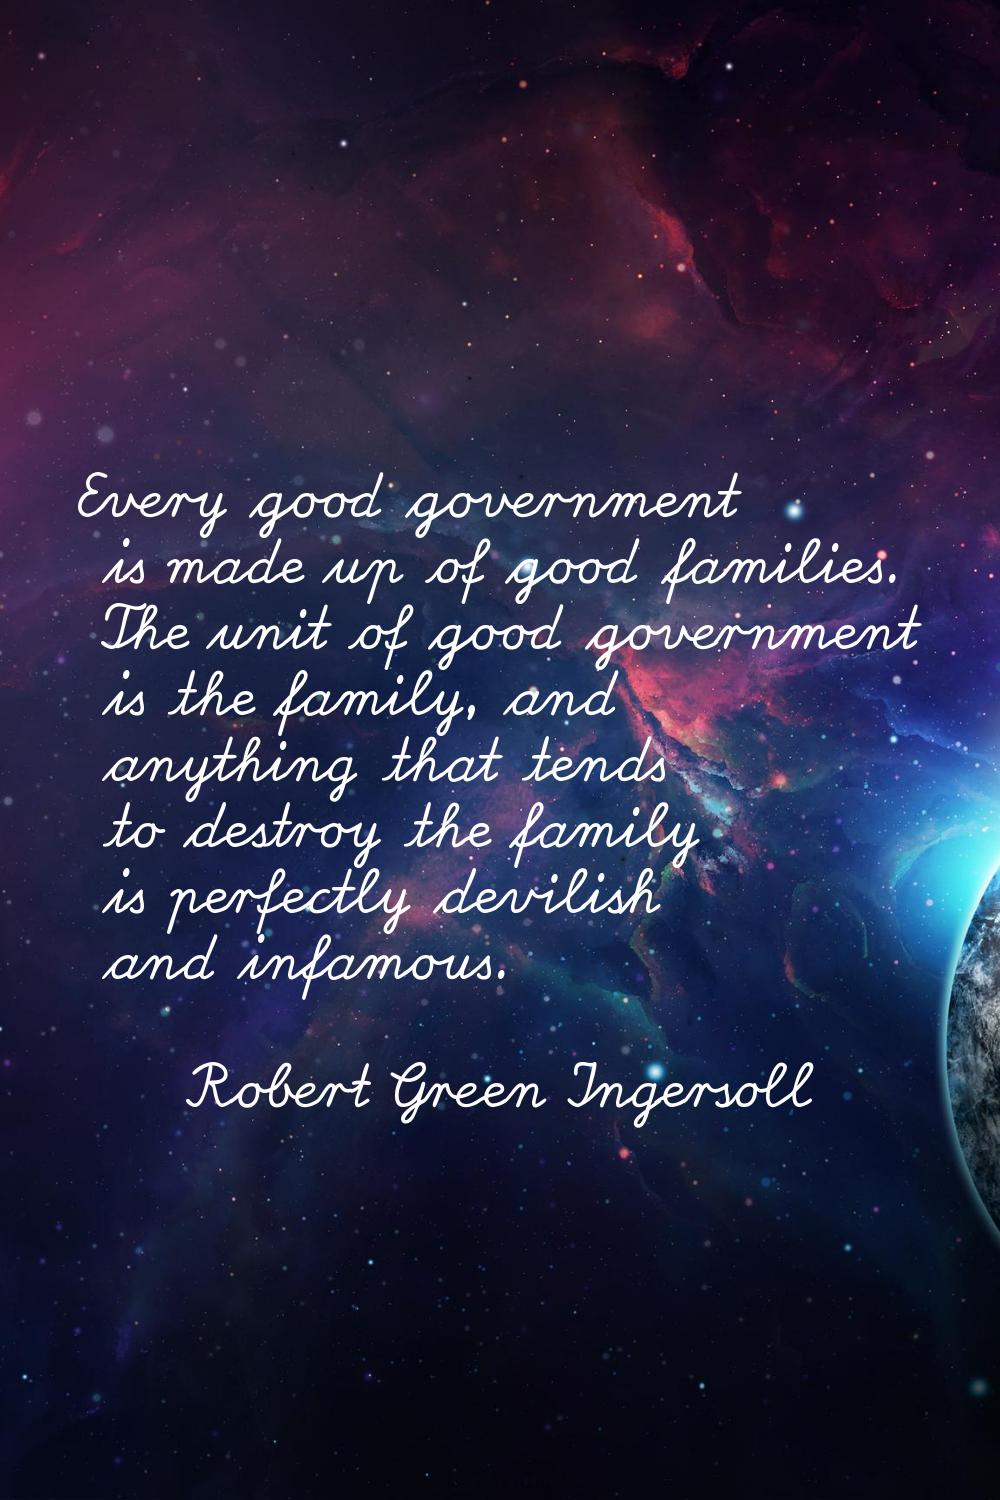 Every good government is made up of good families. The unit of good government is the family, and a